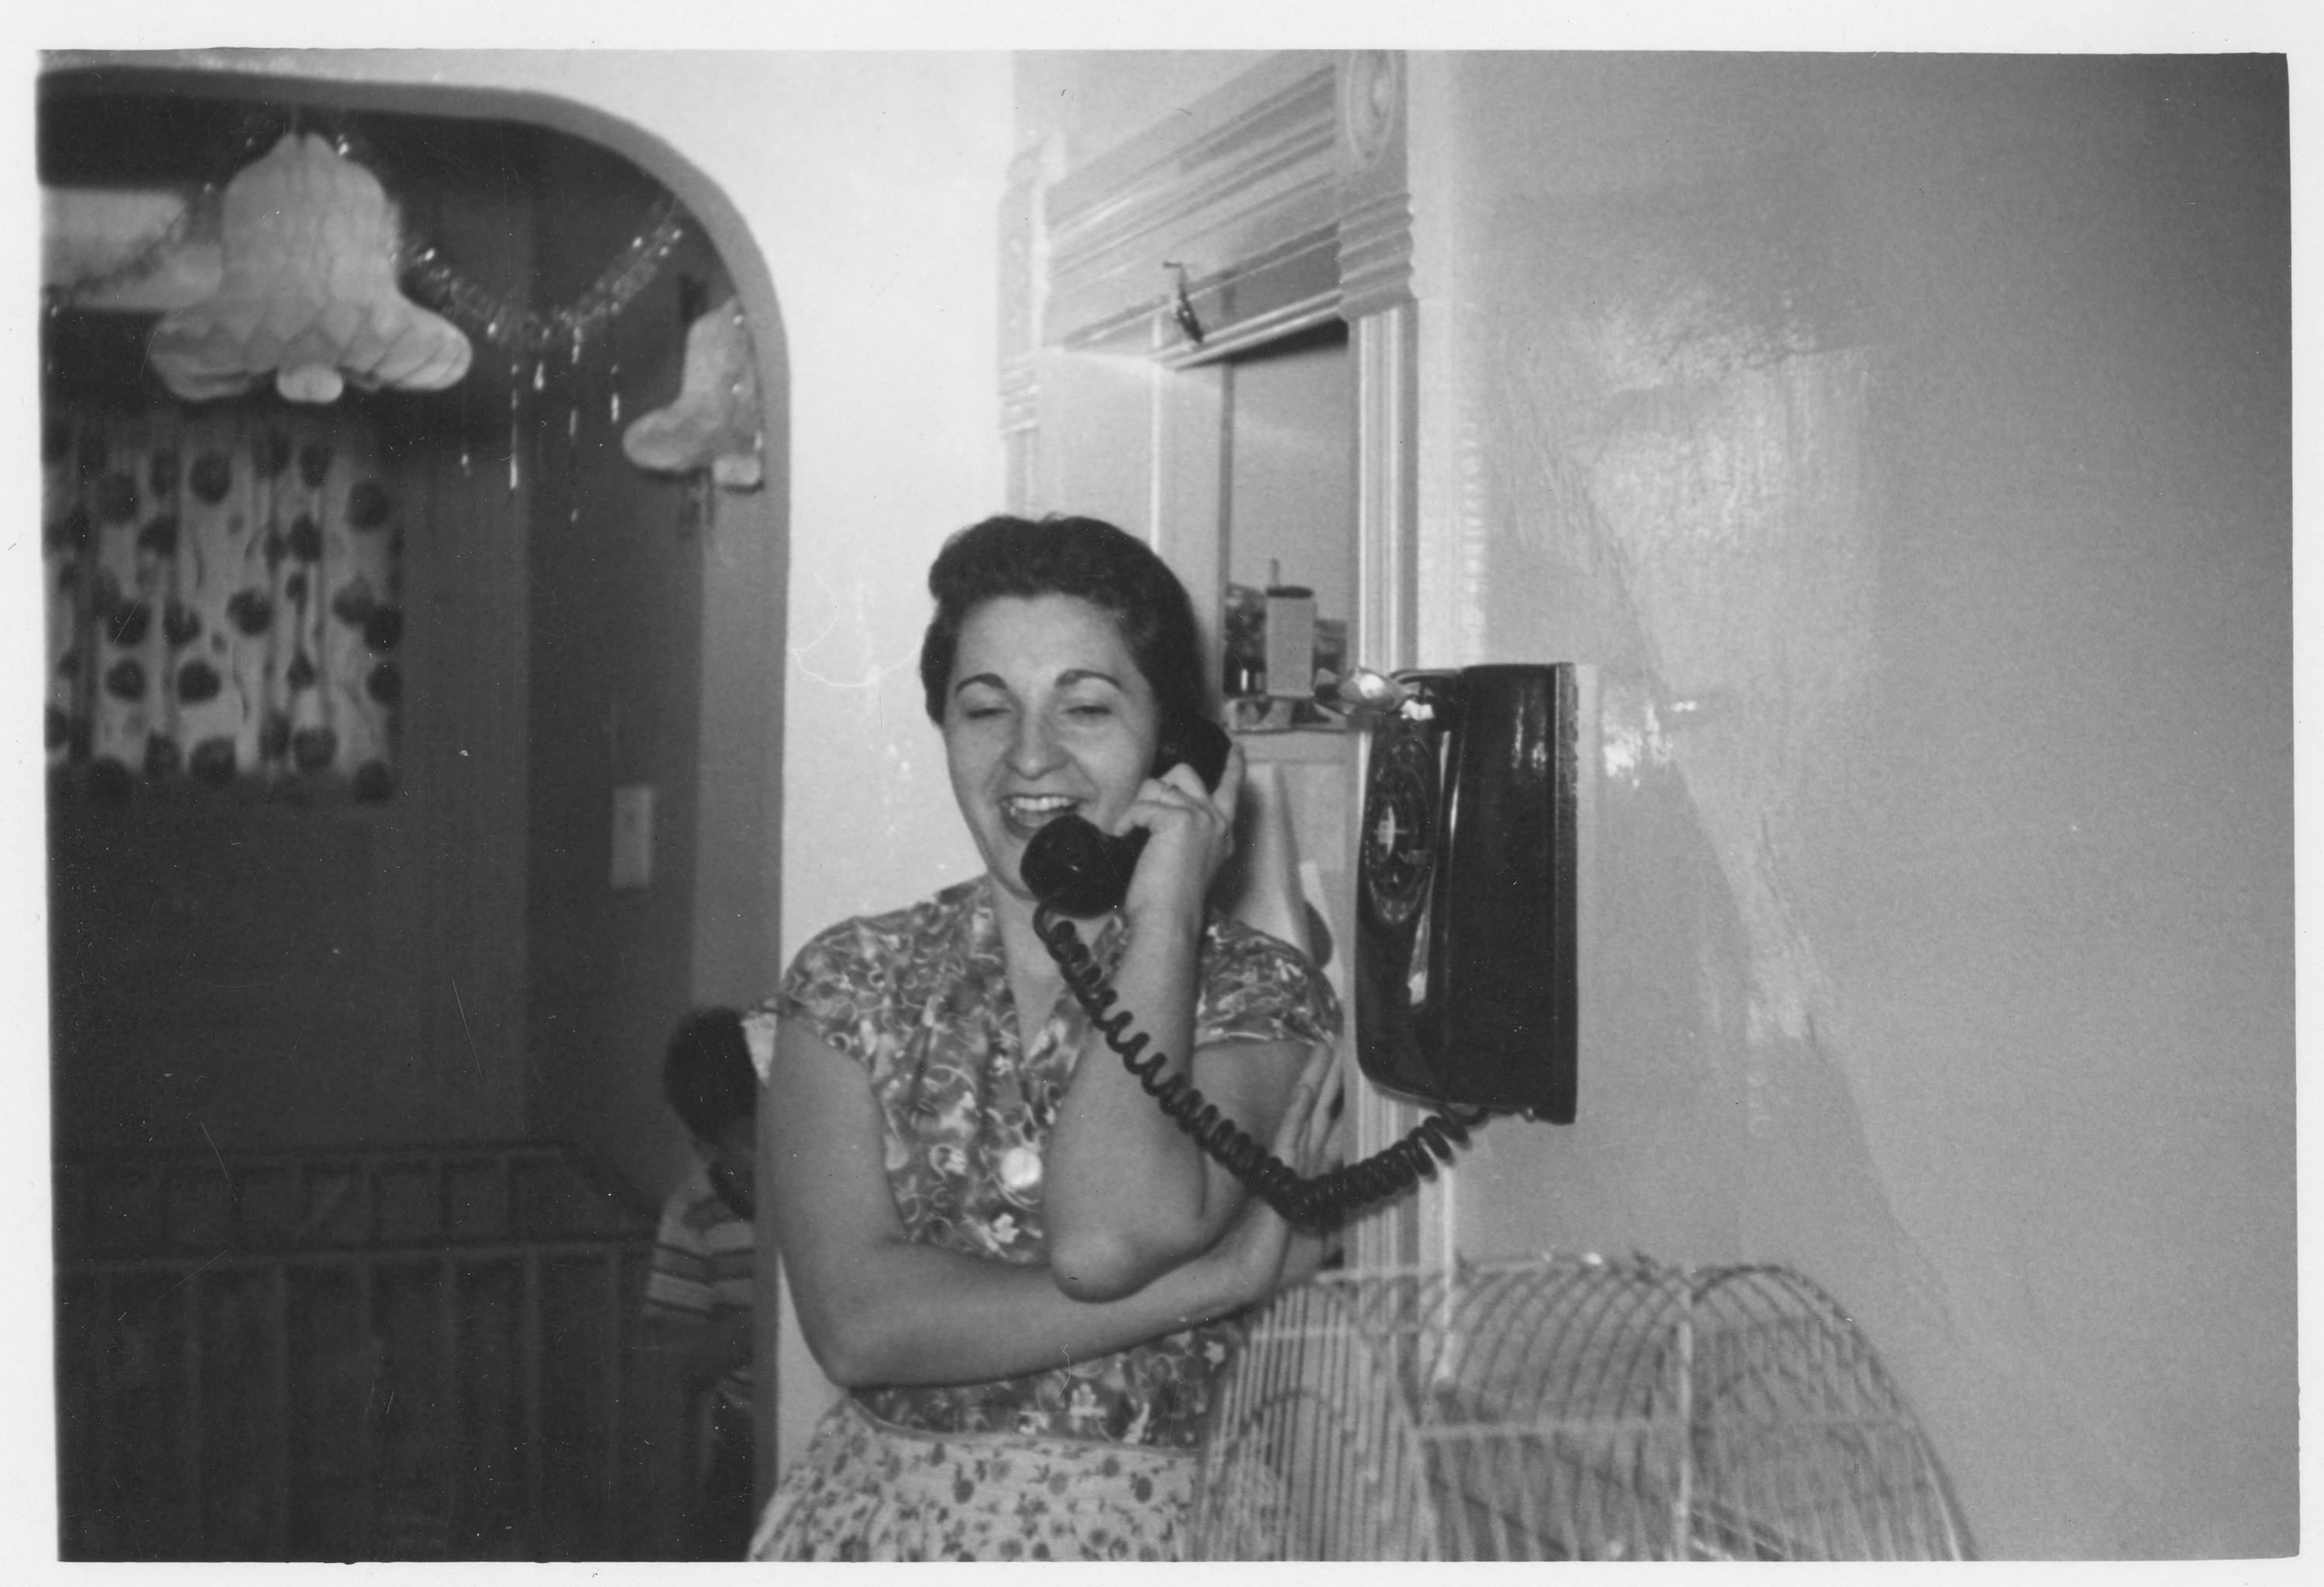 Photo of a woman talking on the telephone, around 1955. She is wearing a dress with a belt, and she has short dark hair. She is standing in a hallway, leaning against the wall to talk on the wall-mounted telephone. A holiday decoration made of paper in the shape of a bell hangs from the ceiling behind her. She is smiling while she chats on the phone.